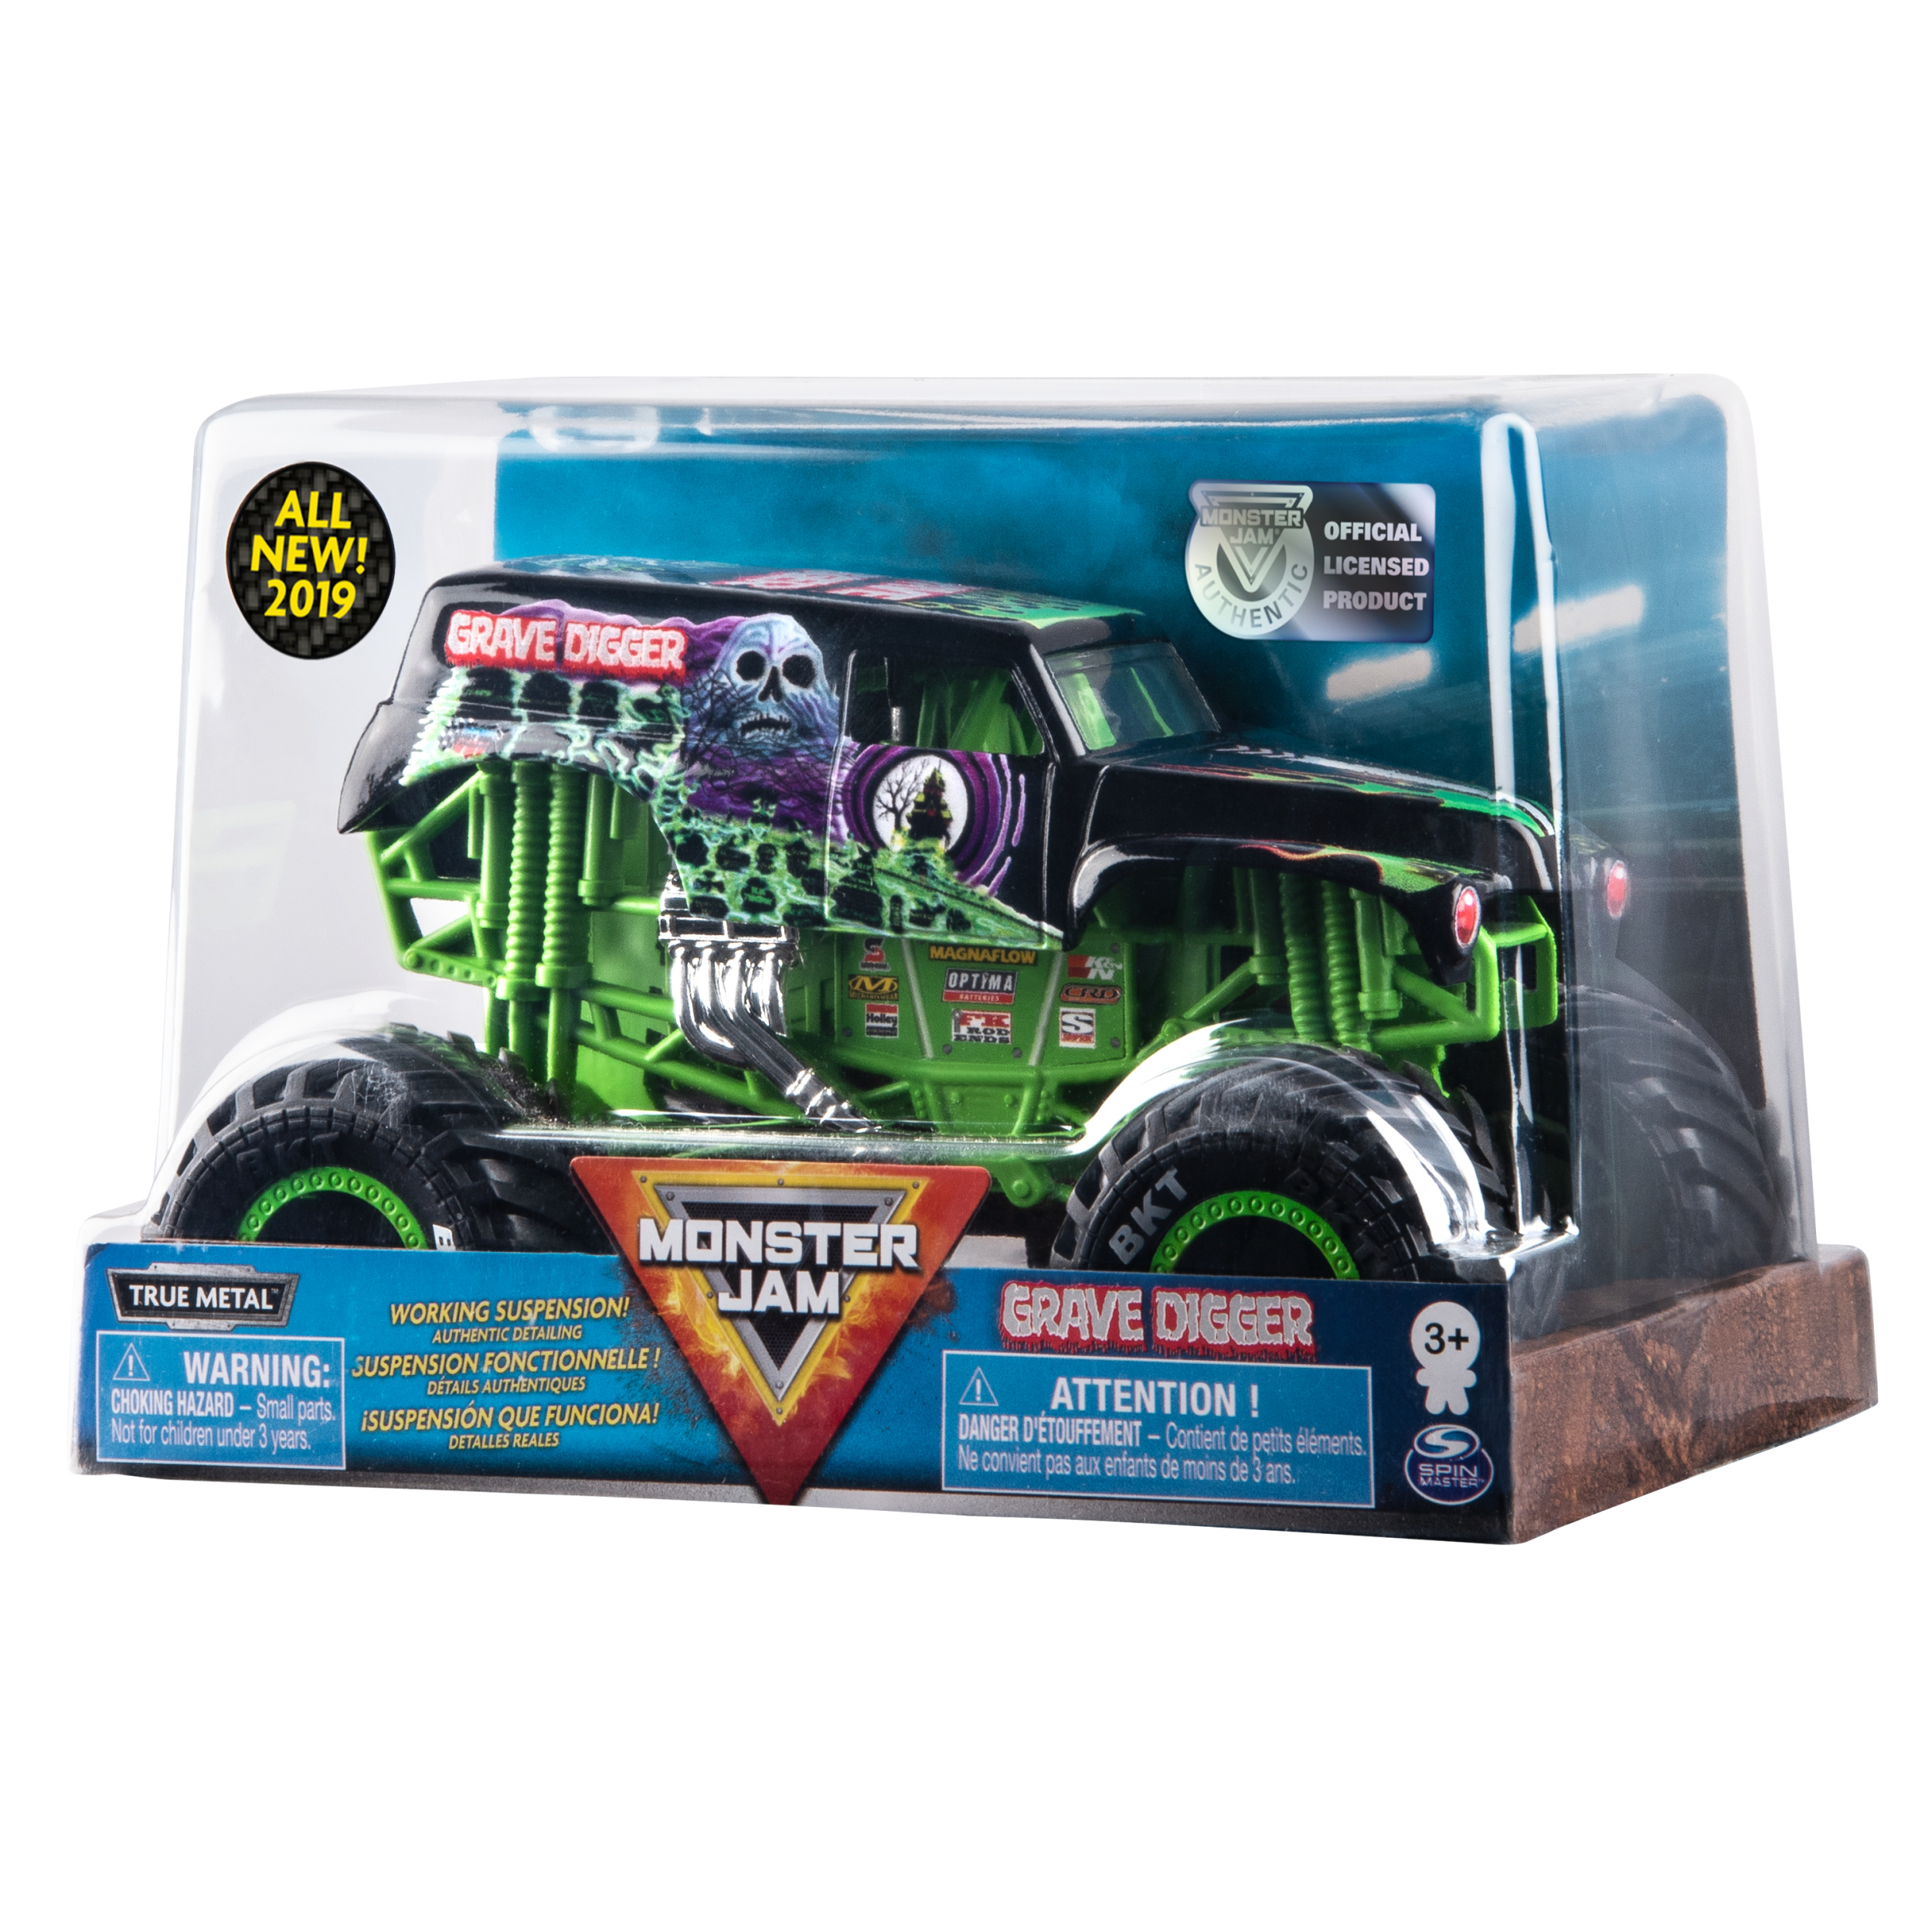 Monster Jam, Official Grave Digger Monster Truck, Die-Cast Vehicle, 1:24 Scale - image 5 of 5